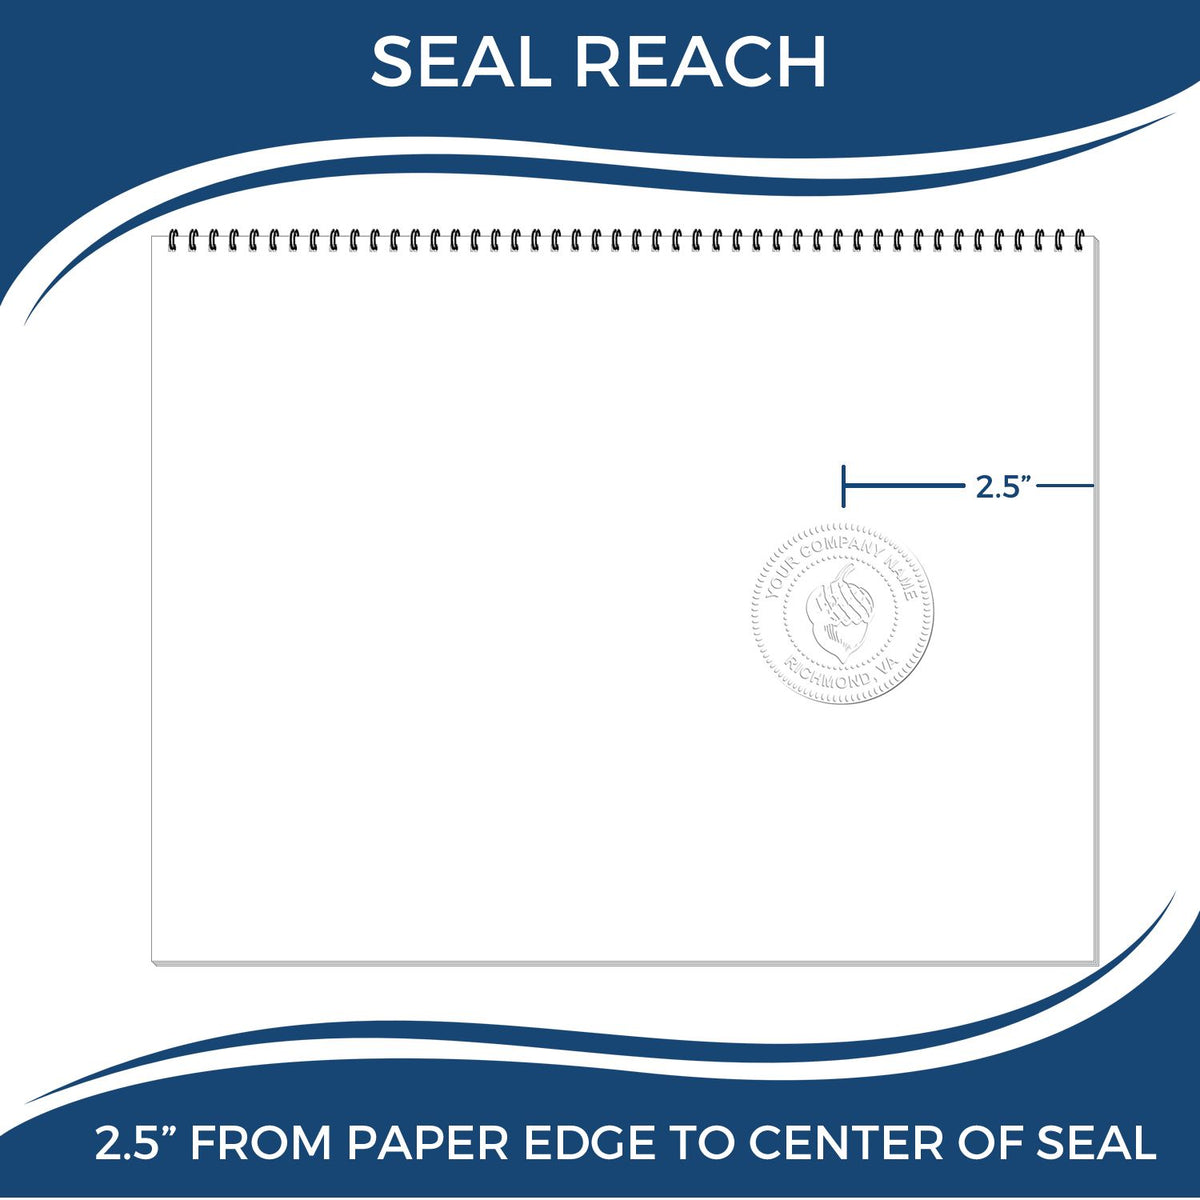 An infographic showing the seal reach which is represented by a ruler and a miniature seal image of the Long Reach Kansas Land Surveyor Seal